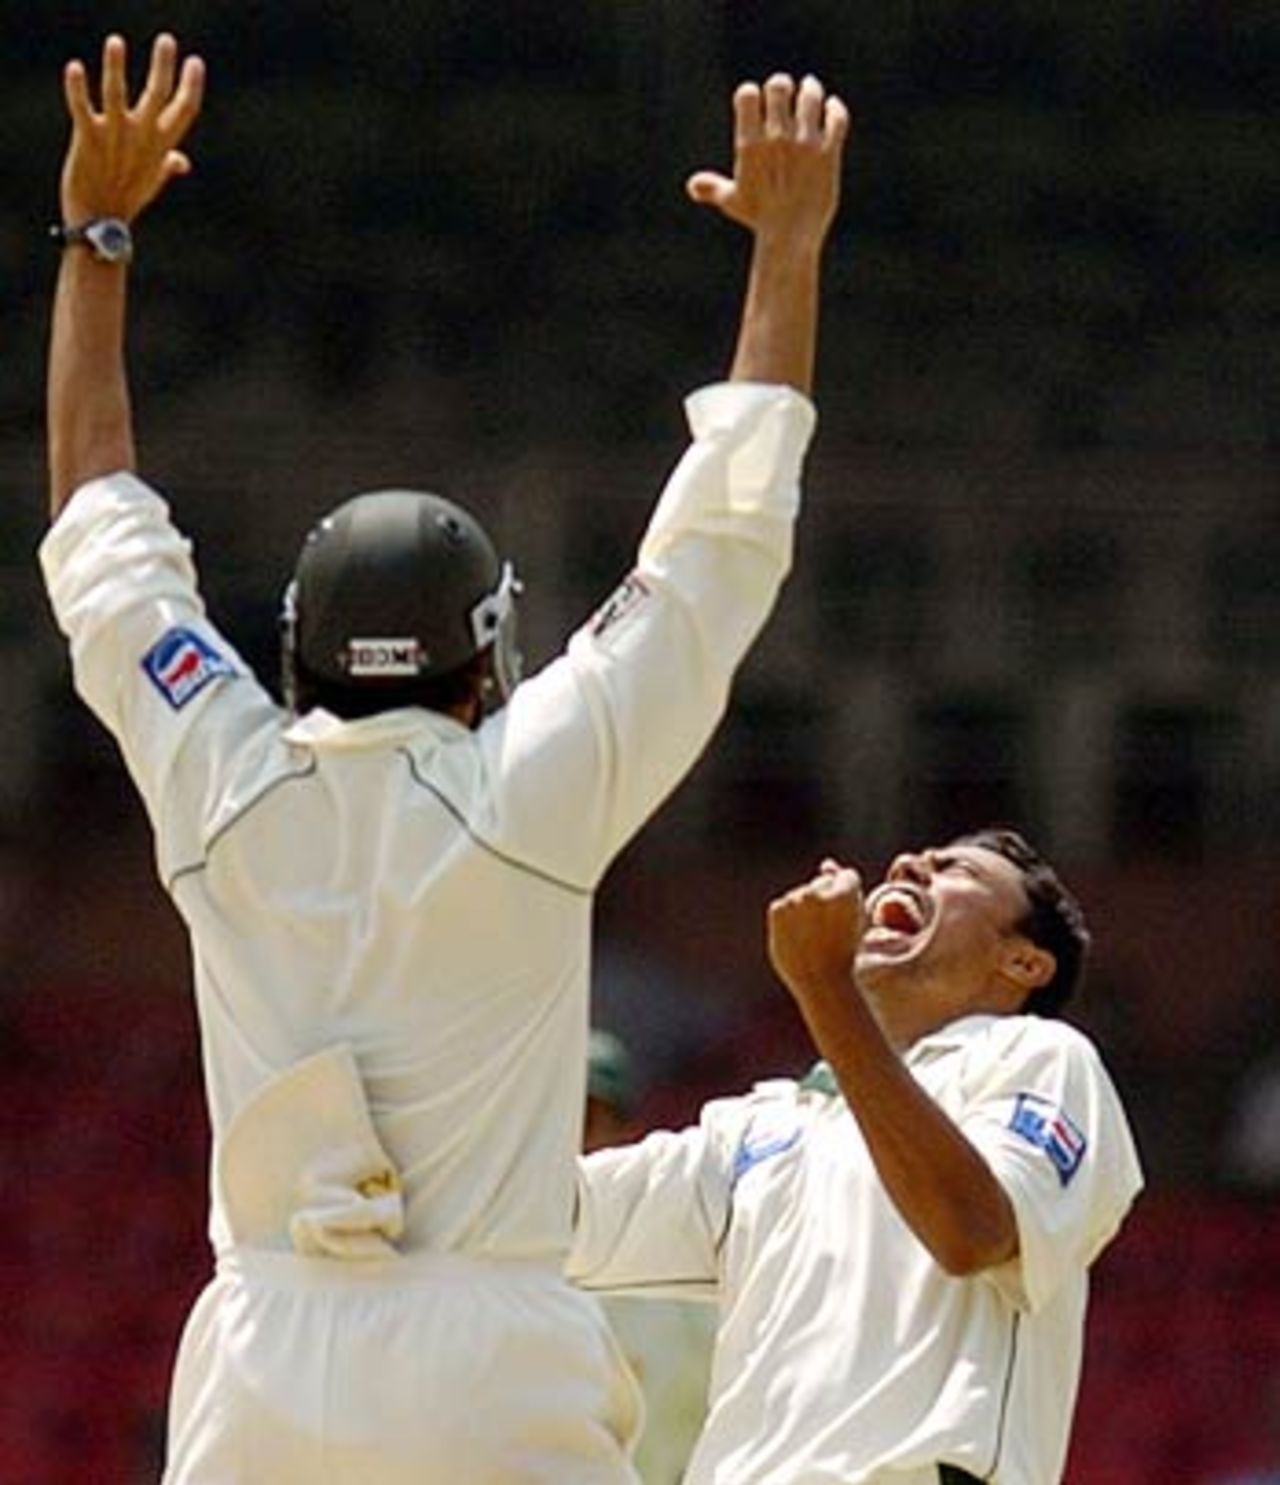 Danish Kaneria was ecstatic after picking up his second five-wicket haul of the series, India v Pakistan, 3rd Test, Bangalore, 4th day, March 27, 2005